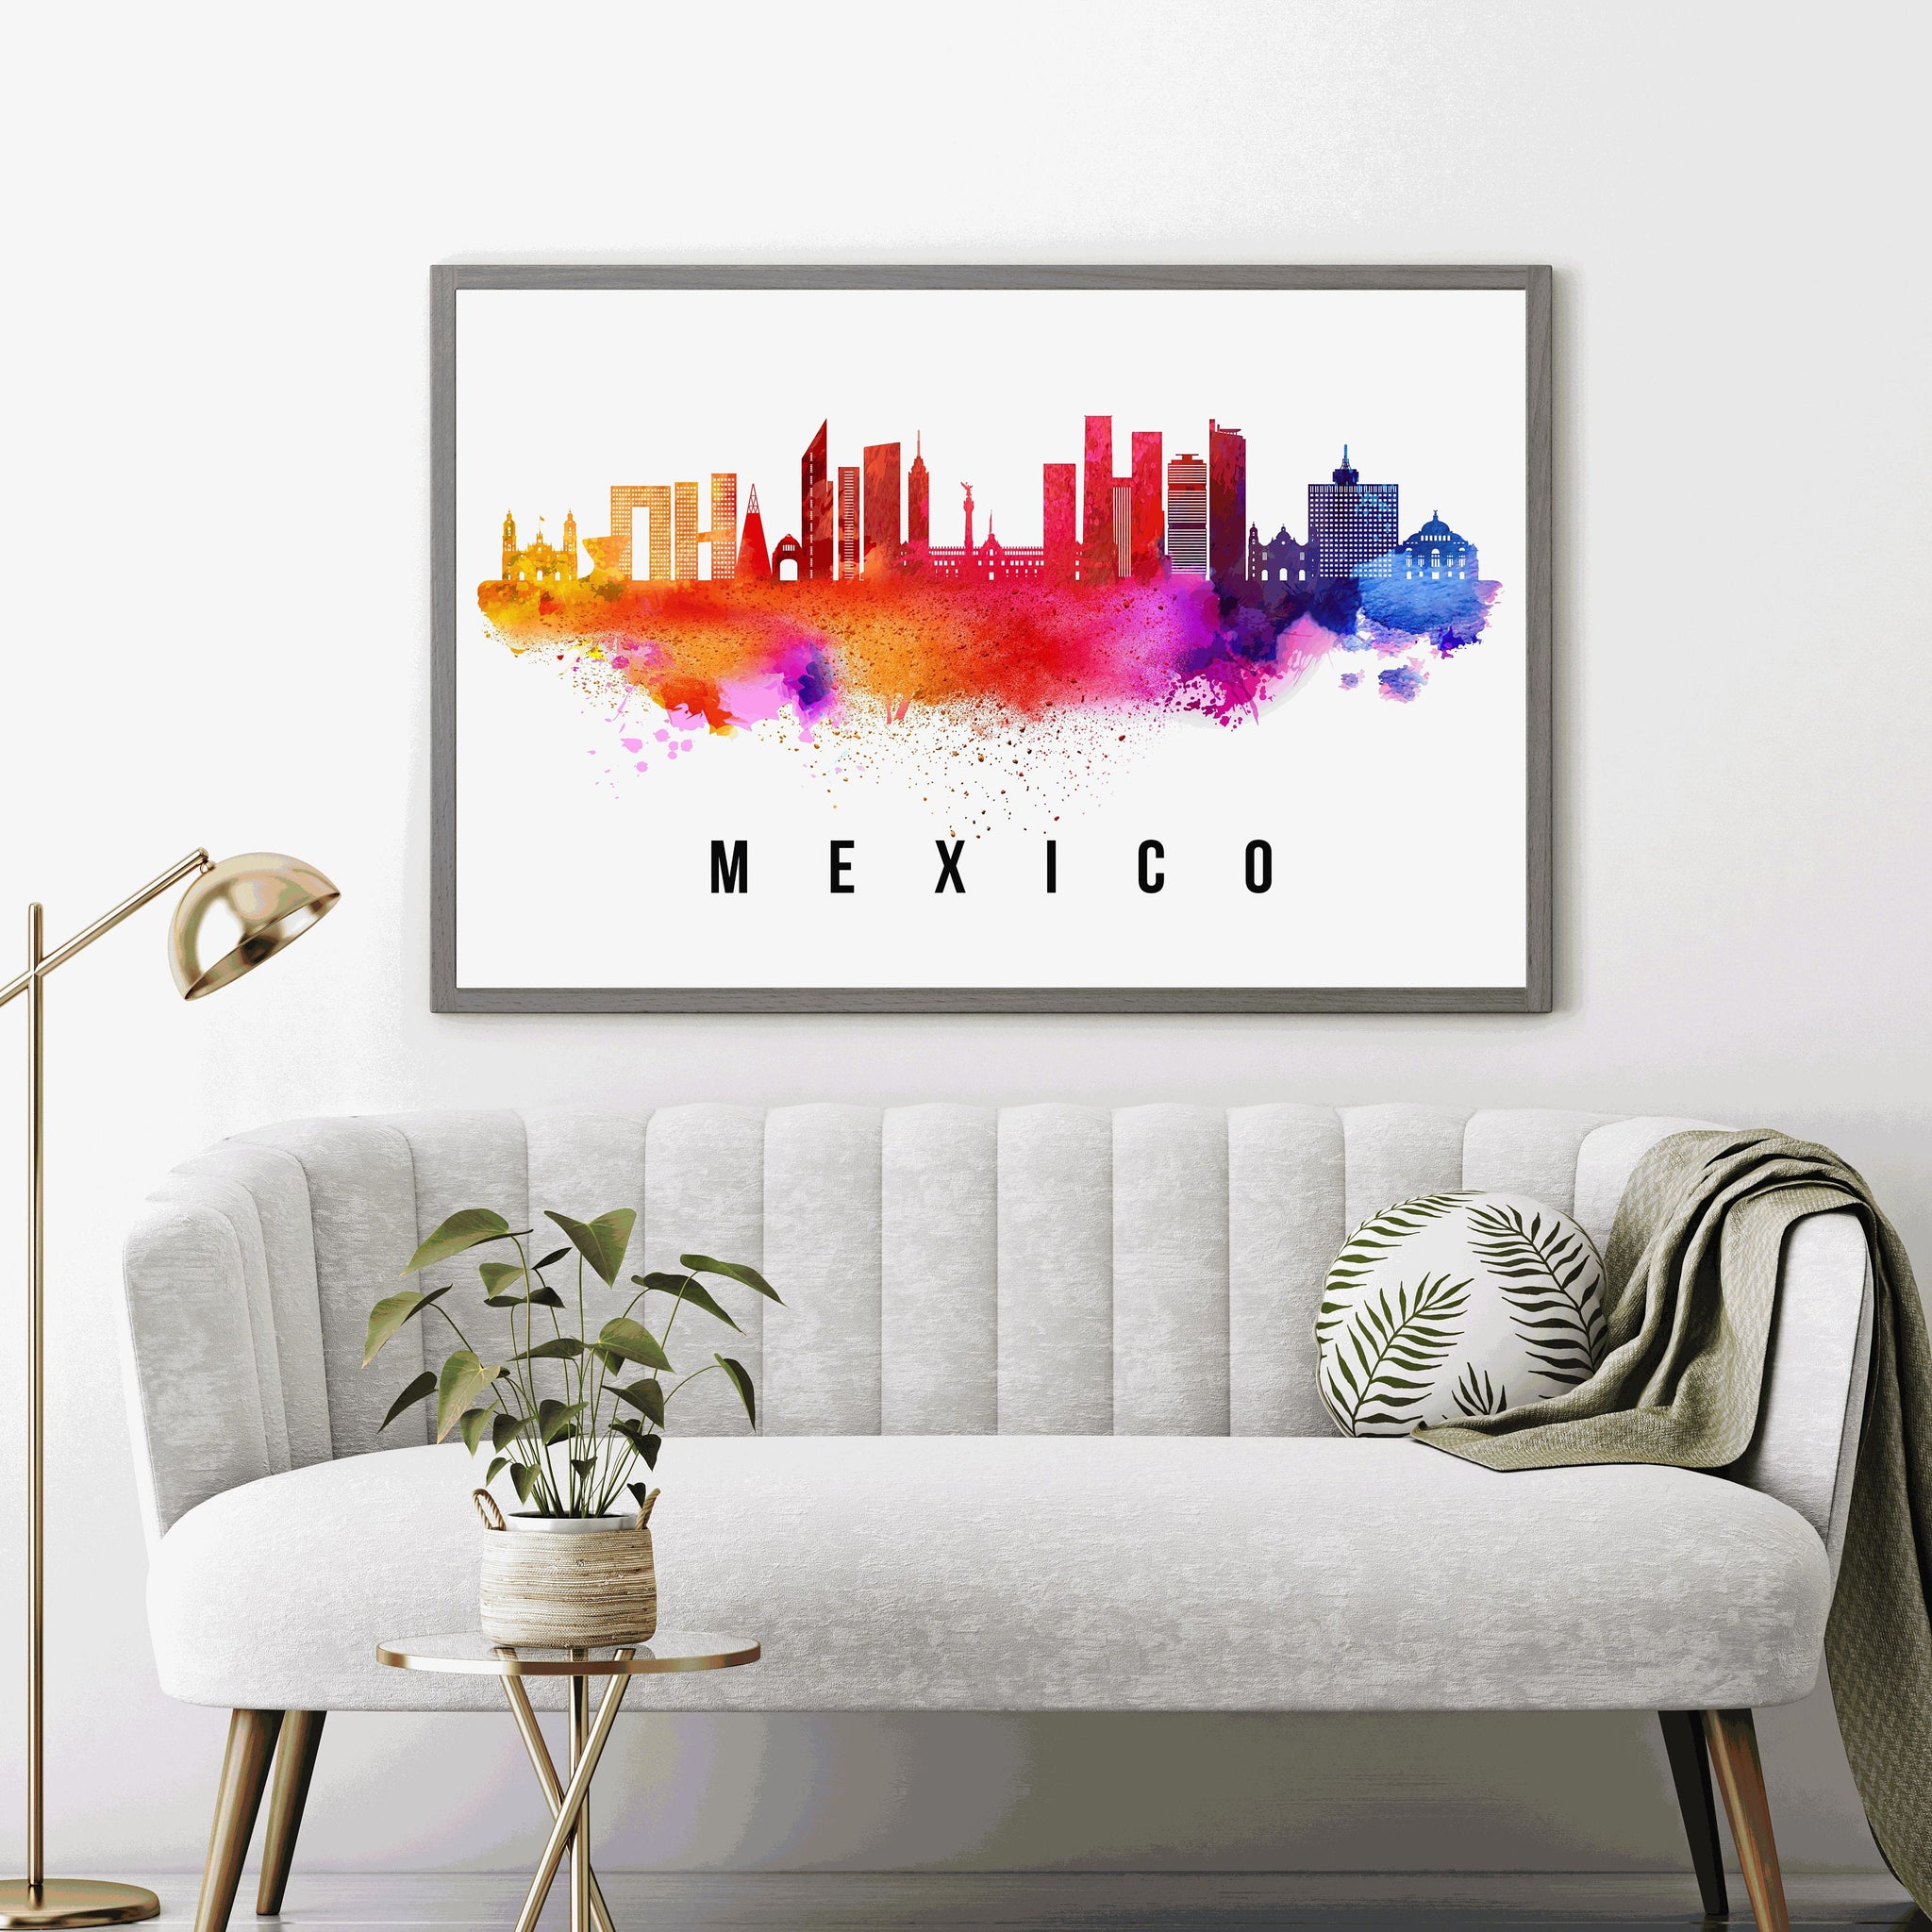 MEXICO CITY - MEXICO Poster, Skyline Poster Cityscape and Landmark Mexico City Illustration Home Wall Art, Office Decor